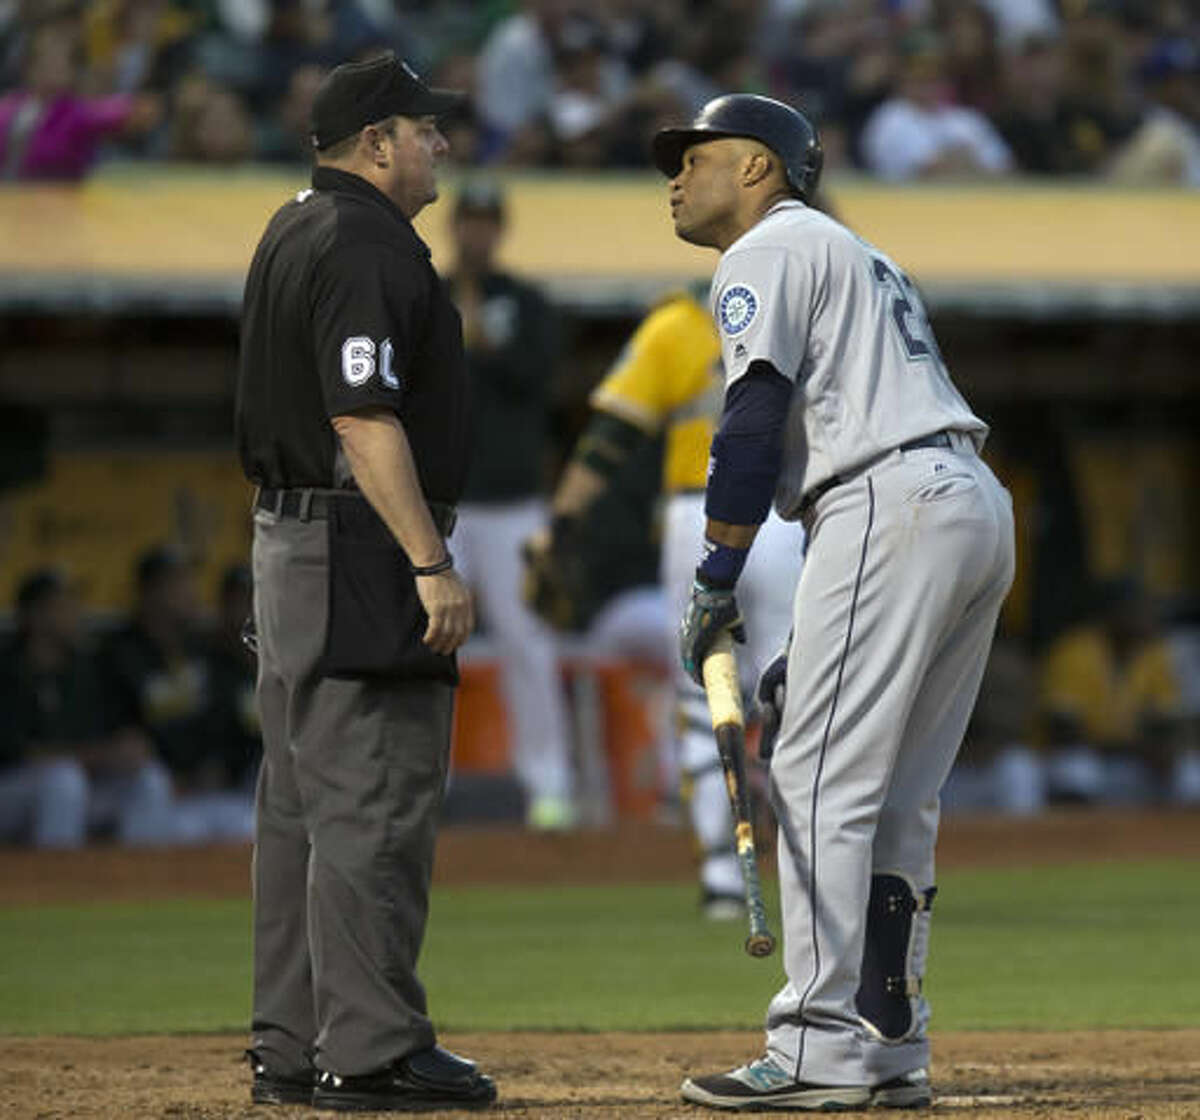 Seattle Mariners' Robinson Cano argues with home plate umpire Marty Foster after being called out on strikes during the fourth inning of a baseball game against the Oakland Athletics, Friday, Aug. 12, 2016, in Oakland, Calif. (AP Photo/D. Ross Cameron)